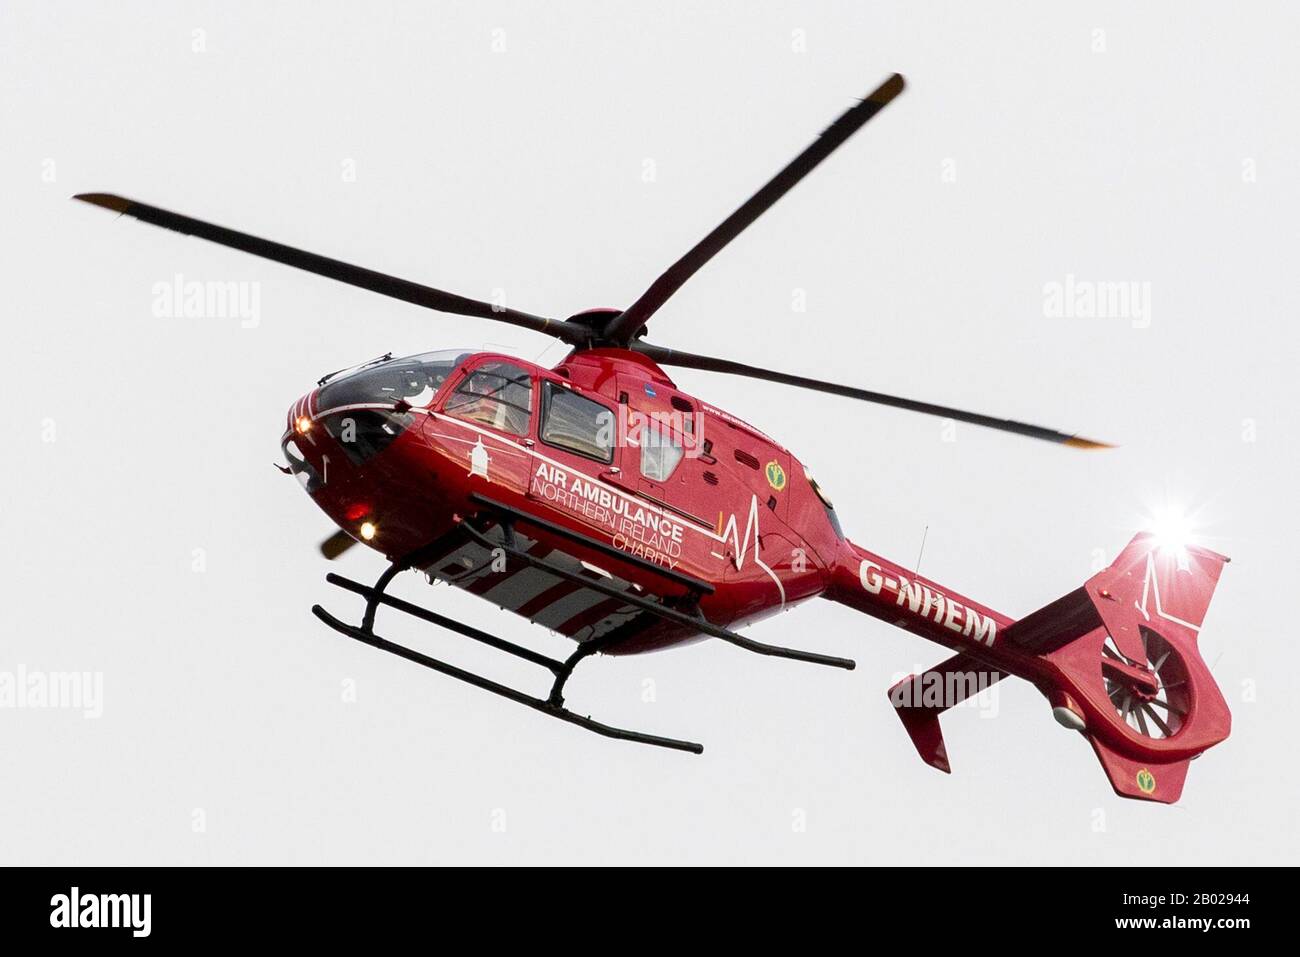 An air ambulance used by the Northern Ireland Helicopter Emergency Medical Service (HEMS) comes in to land on the helipad at the Royal Victoria Hospital in West Belfast, as the first test landing of an air ambulance took place on Tuesday at the West Belfast hospital. Stock Photo